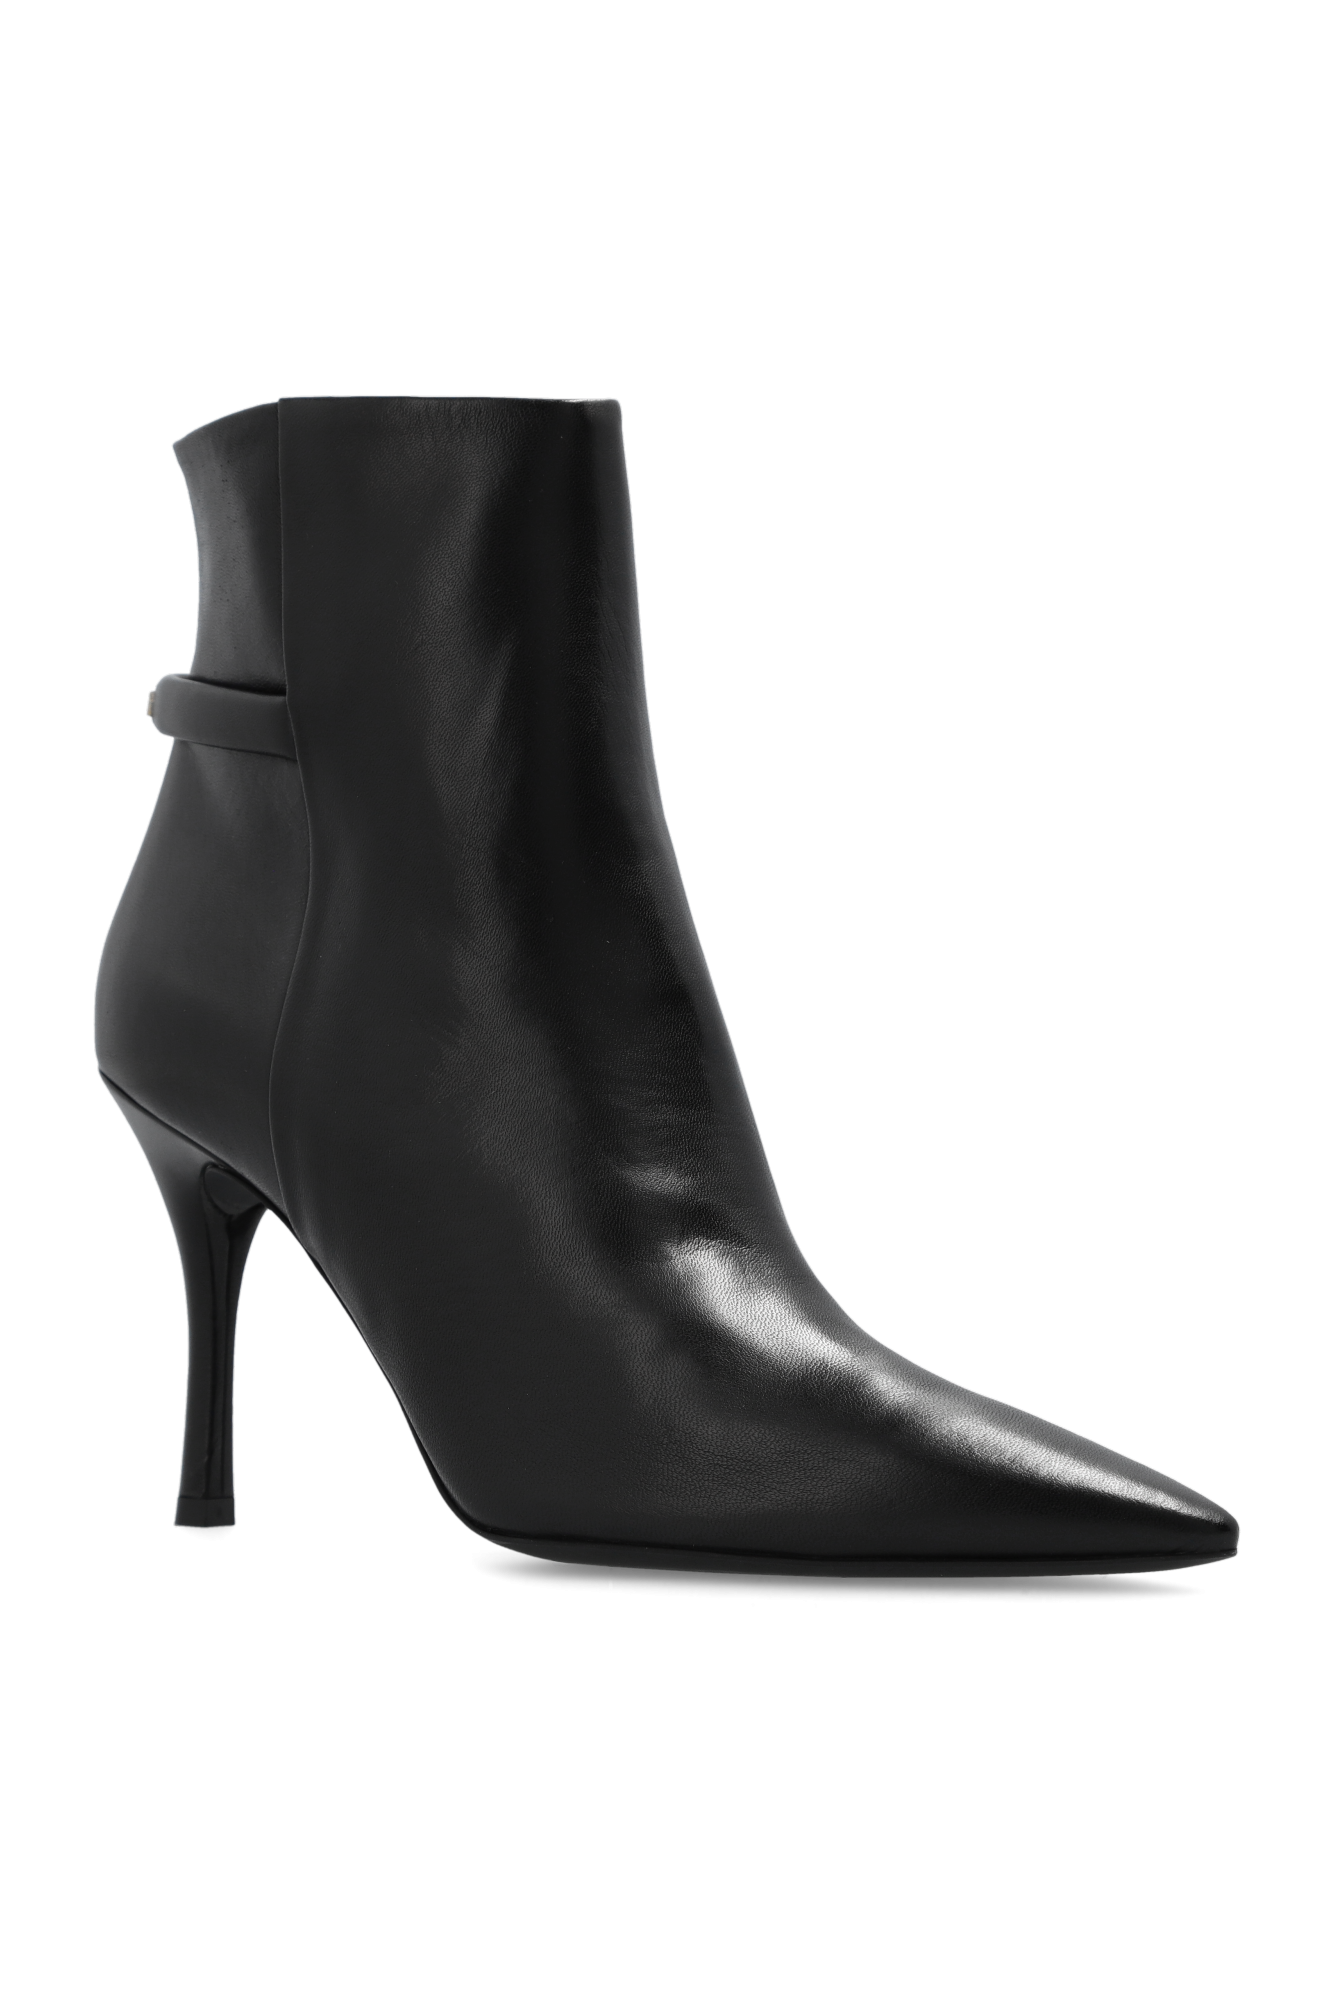 Furla ‘Core’ leather heeled ankle boots